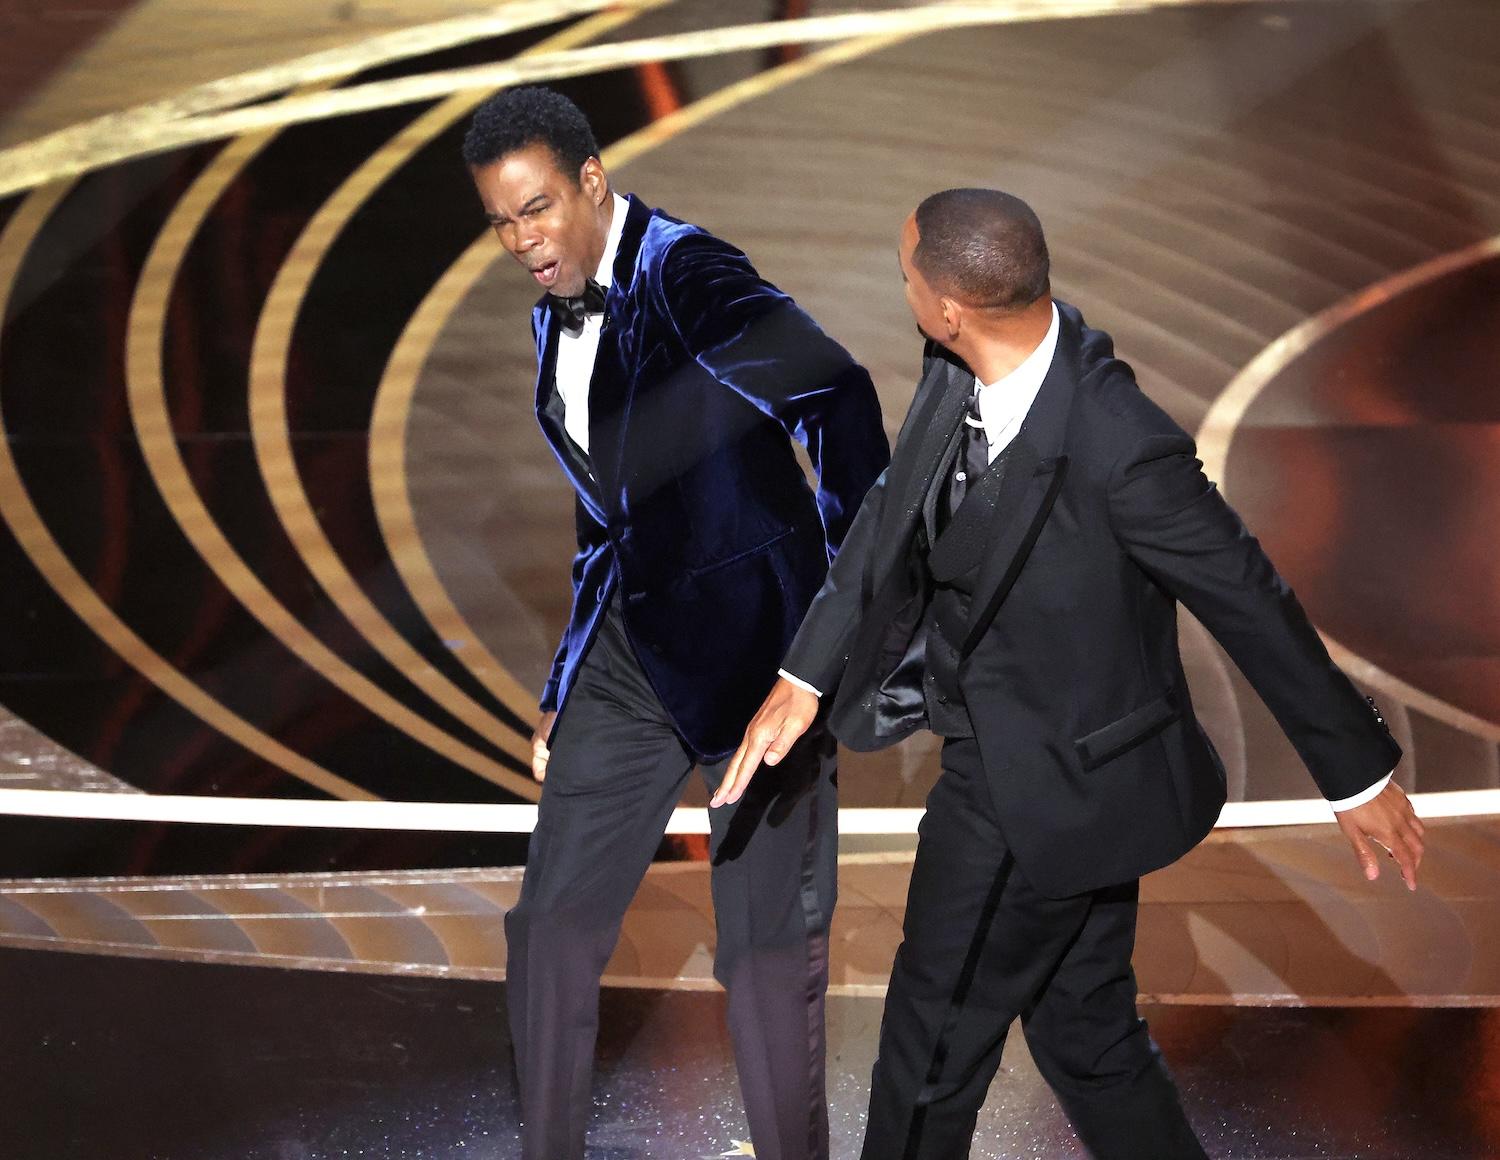 Will Smith slapping Chris Rock at the 94th Academy Awards on March 27, 2022